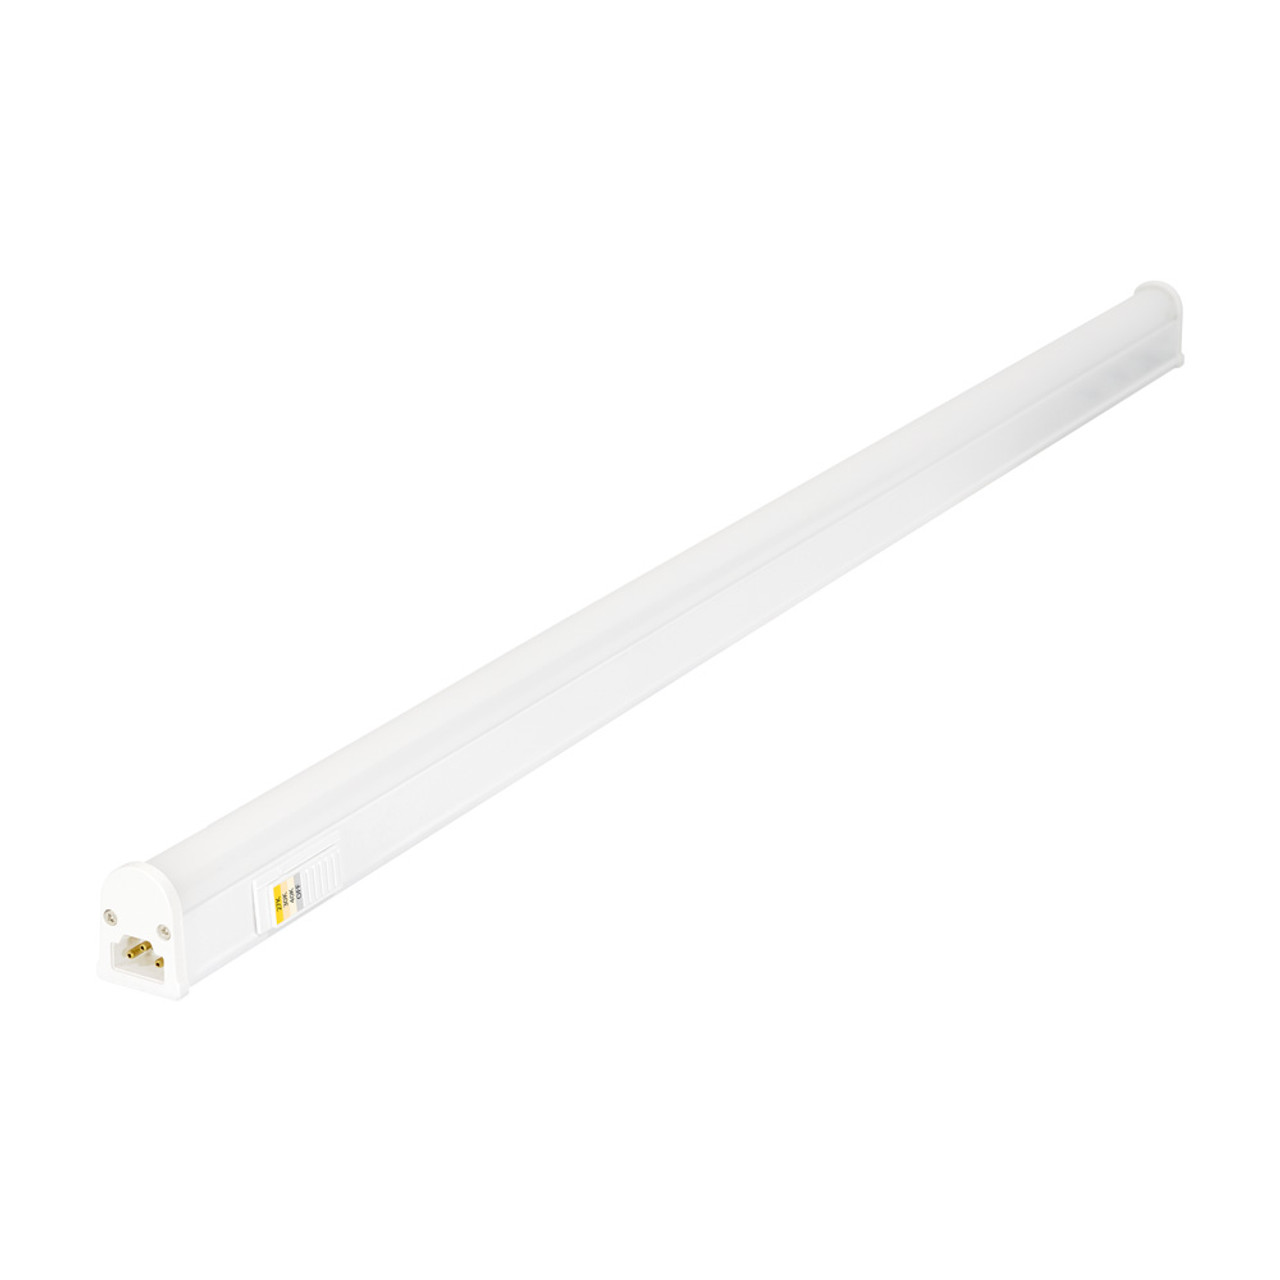 JESCO LIGHTING SG250-24-SWC-WH 24 Inch LED Linkable Rigid Linear with Adjustable Color Temperature